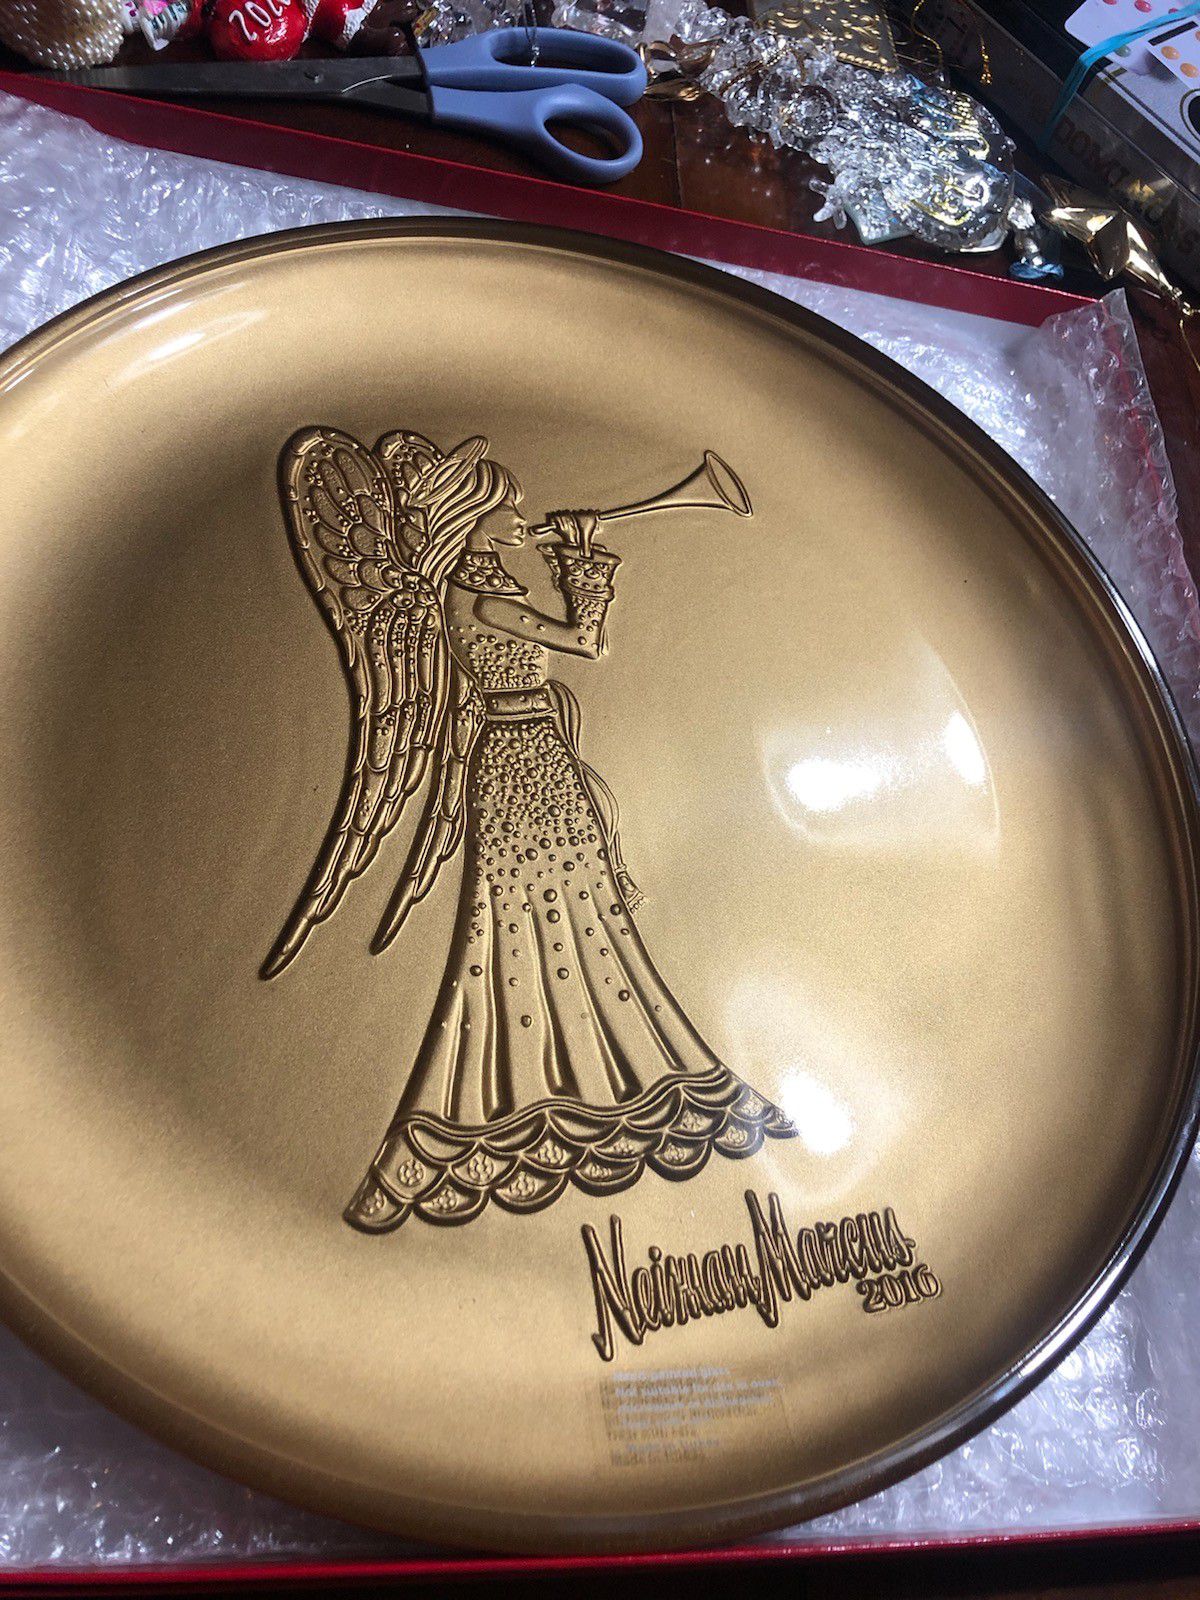 Neiman Marcus Collectors plate Brand New never used 2016